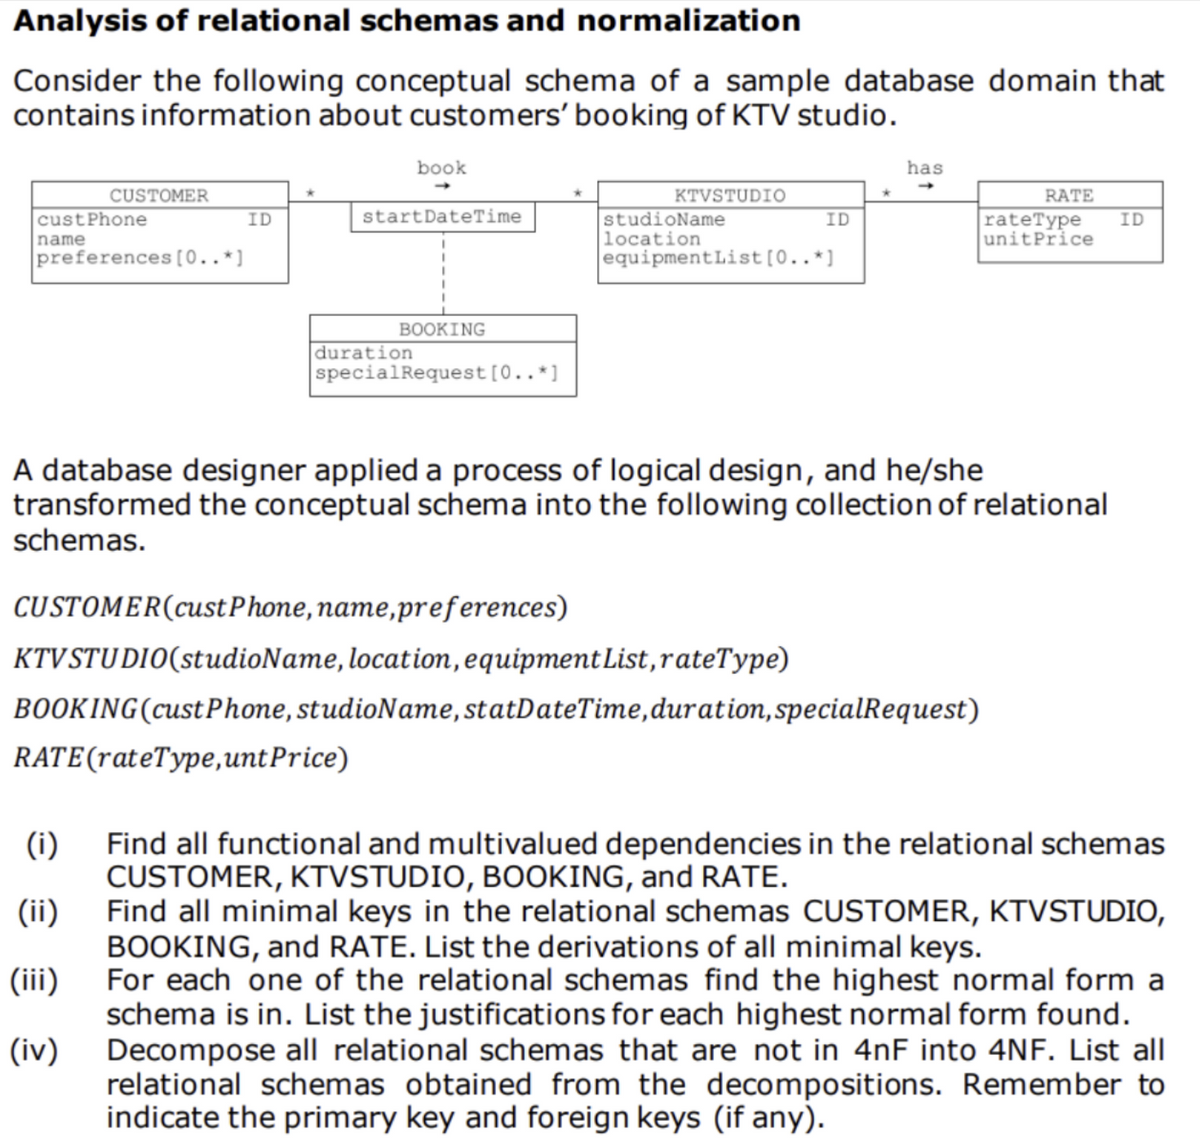 Analysis of relational schemas and normalization
Consider the following conceptual schema of a sample database domain that
contains information about customers' booking of KTV studio.
book
has
CUSTOMER
KTVSTUDIO
custPhone
ID
startDateTime
ID
RATE
rateType
unitPrice
studioName
location
ID
name
preferences [0..*]
equipmentList [0..*]
BOOKING
duration
specialRequest [0..*]
A database designer applied a process of logical design, and he/she
transformed the conceptual schema into the following collection of relational
schemas.
CUSTOMER(cust Phone, name, preferences)
KTV STUDIO(studioName, location, equipment List, rateType)
BOOKING (cust Phone, studioName, statDateTime, duration, specialRequest)
RATE (rateType,unt Price)
(i)
Find all functional and multivalued dependencies in the relational schemas
CUSTOMER, KTVSTUDIO, BOOKING, and RATE.
(ii)
Find all minimal keys in the relational schemas CUSTOMER, KTVSTUDIO,
BOOKING, and RATE. List the derivations of all minimal keys.
(iii)
(iv)
For each one of the relational schemas find the highest normal form a
schema is in. List the justifications for each highest normal form found.
Decompose all relational schemas that are not in 4nF into 4NF. List all
relational schemas obtained from the decompositions. Remember to
indicate the primary key and foreign keys (if any).